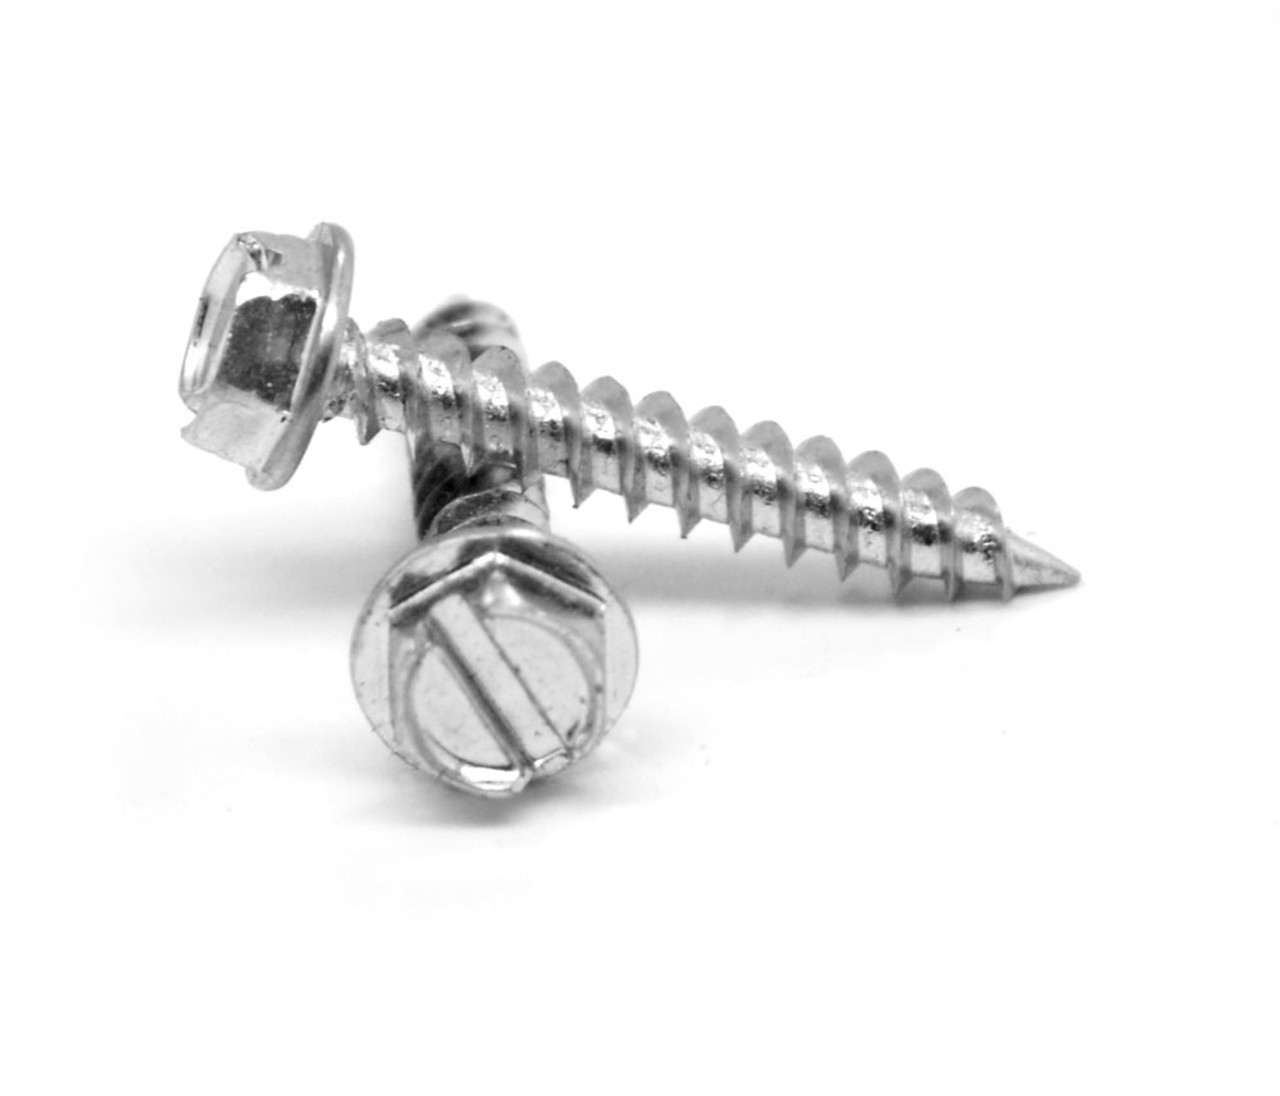 #6-18 x 3/4" (FT) 1/4" AF Self-Piercing Sheet Metal Screw Slotted Hex Washer Head Stainless Steel 18-8